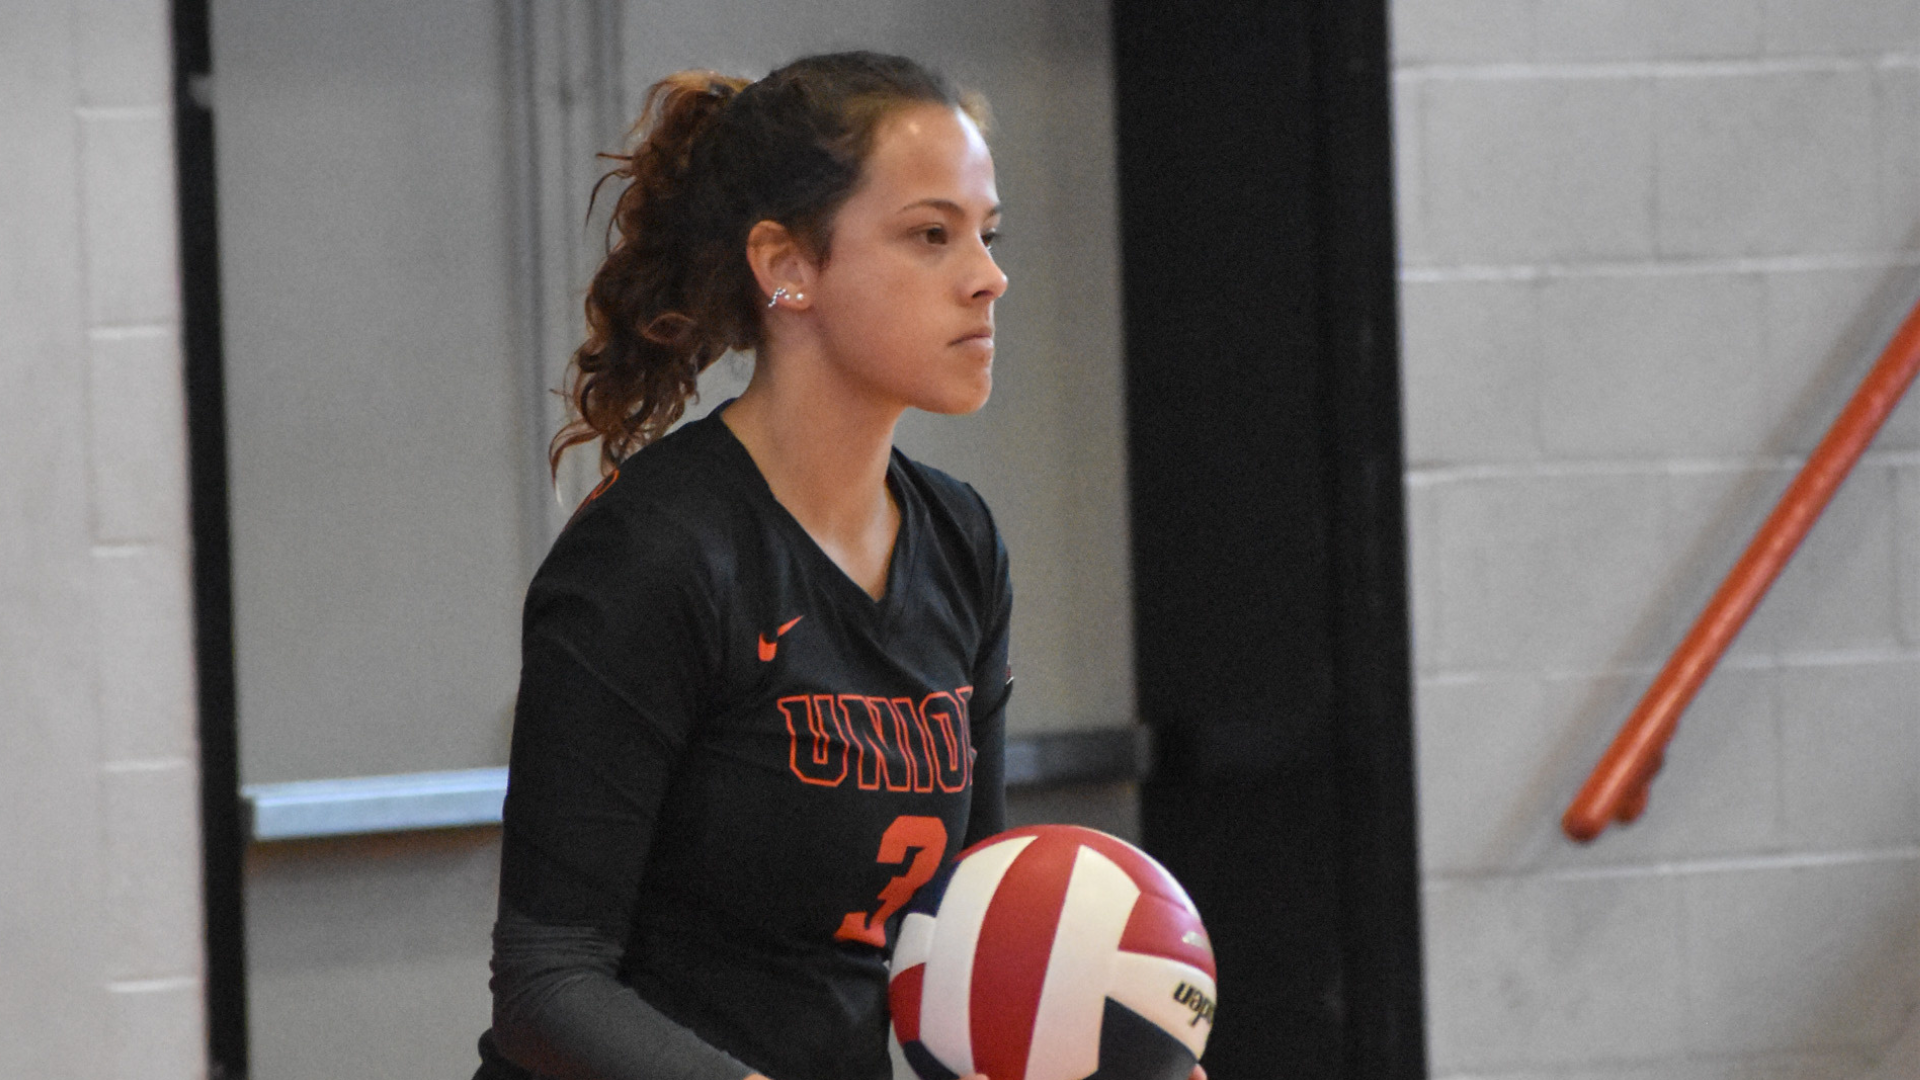 Union falls at Montreat in four sets